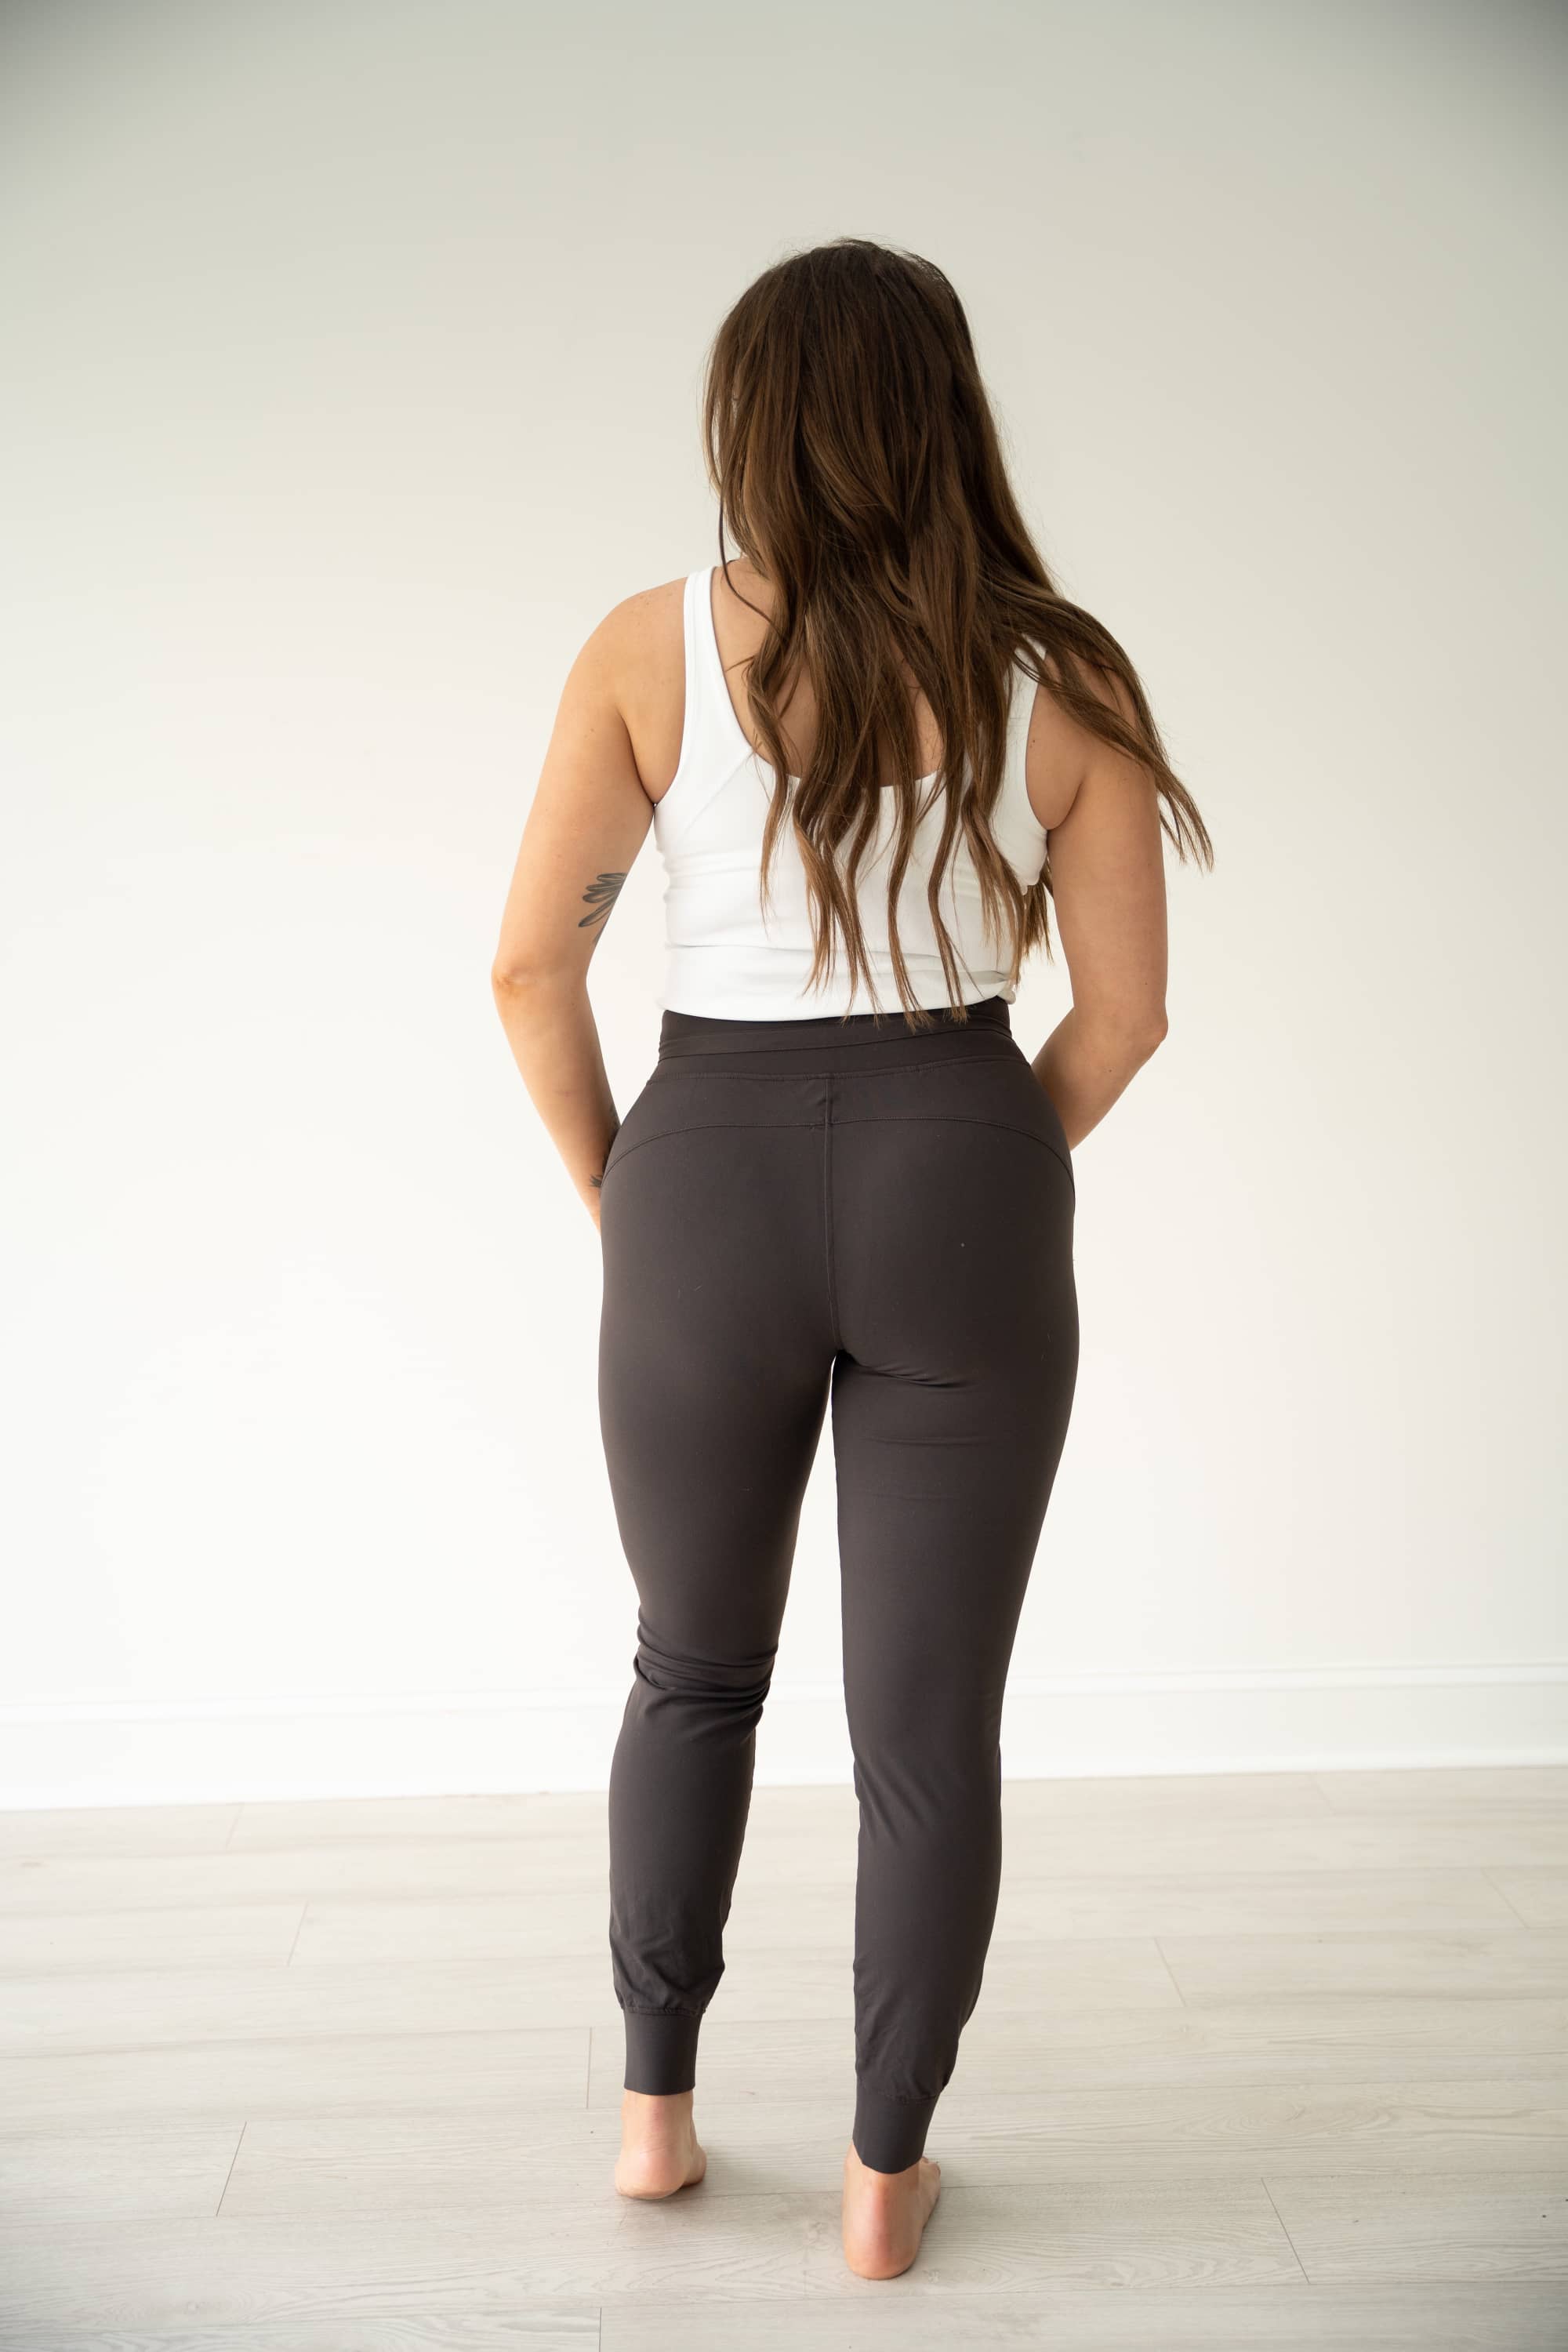 PURPOSE active joggers in Gray with two front pockets, coated drawstrings at waist, and banded hems.